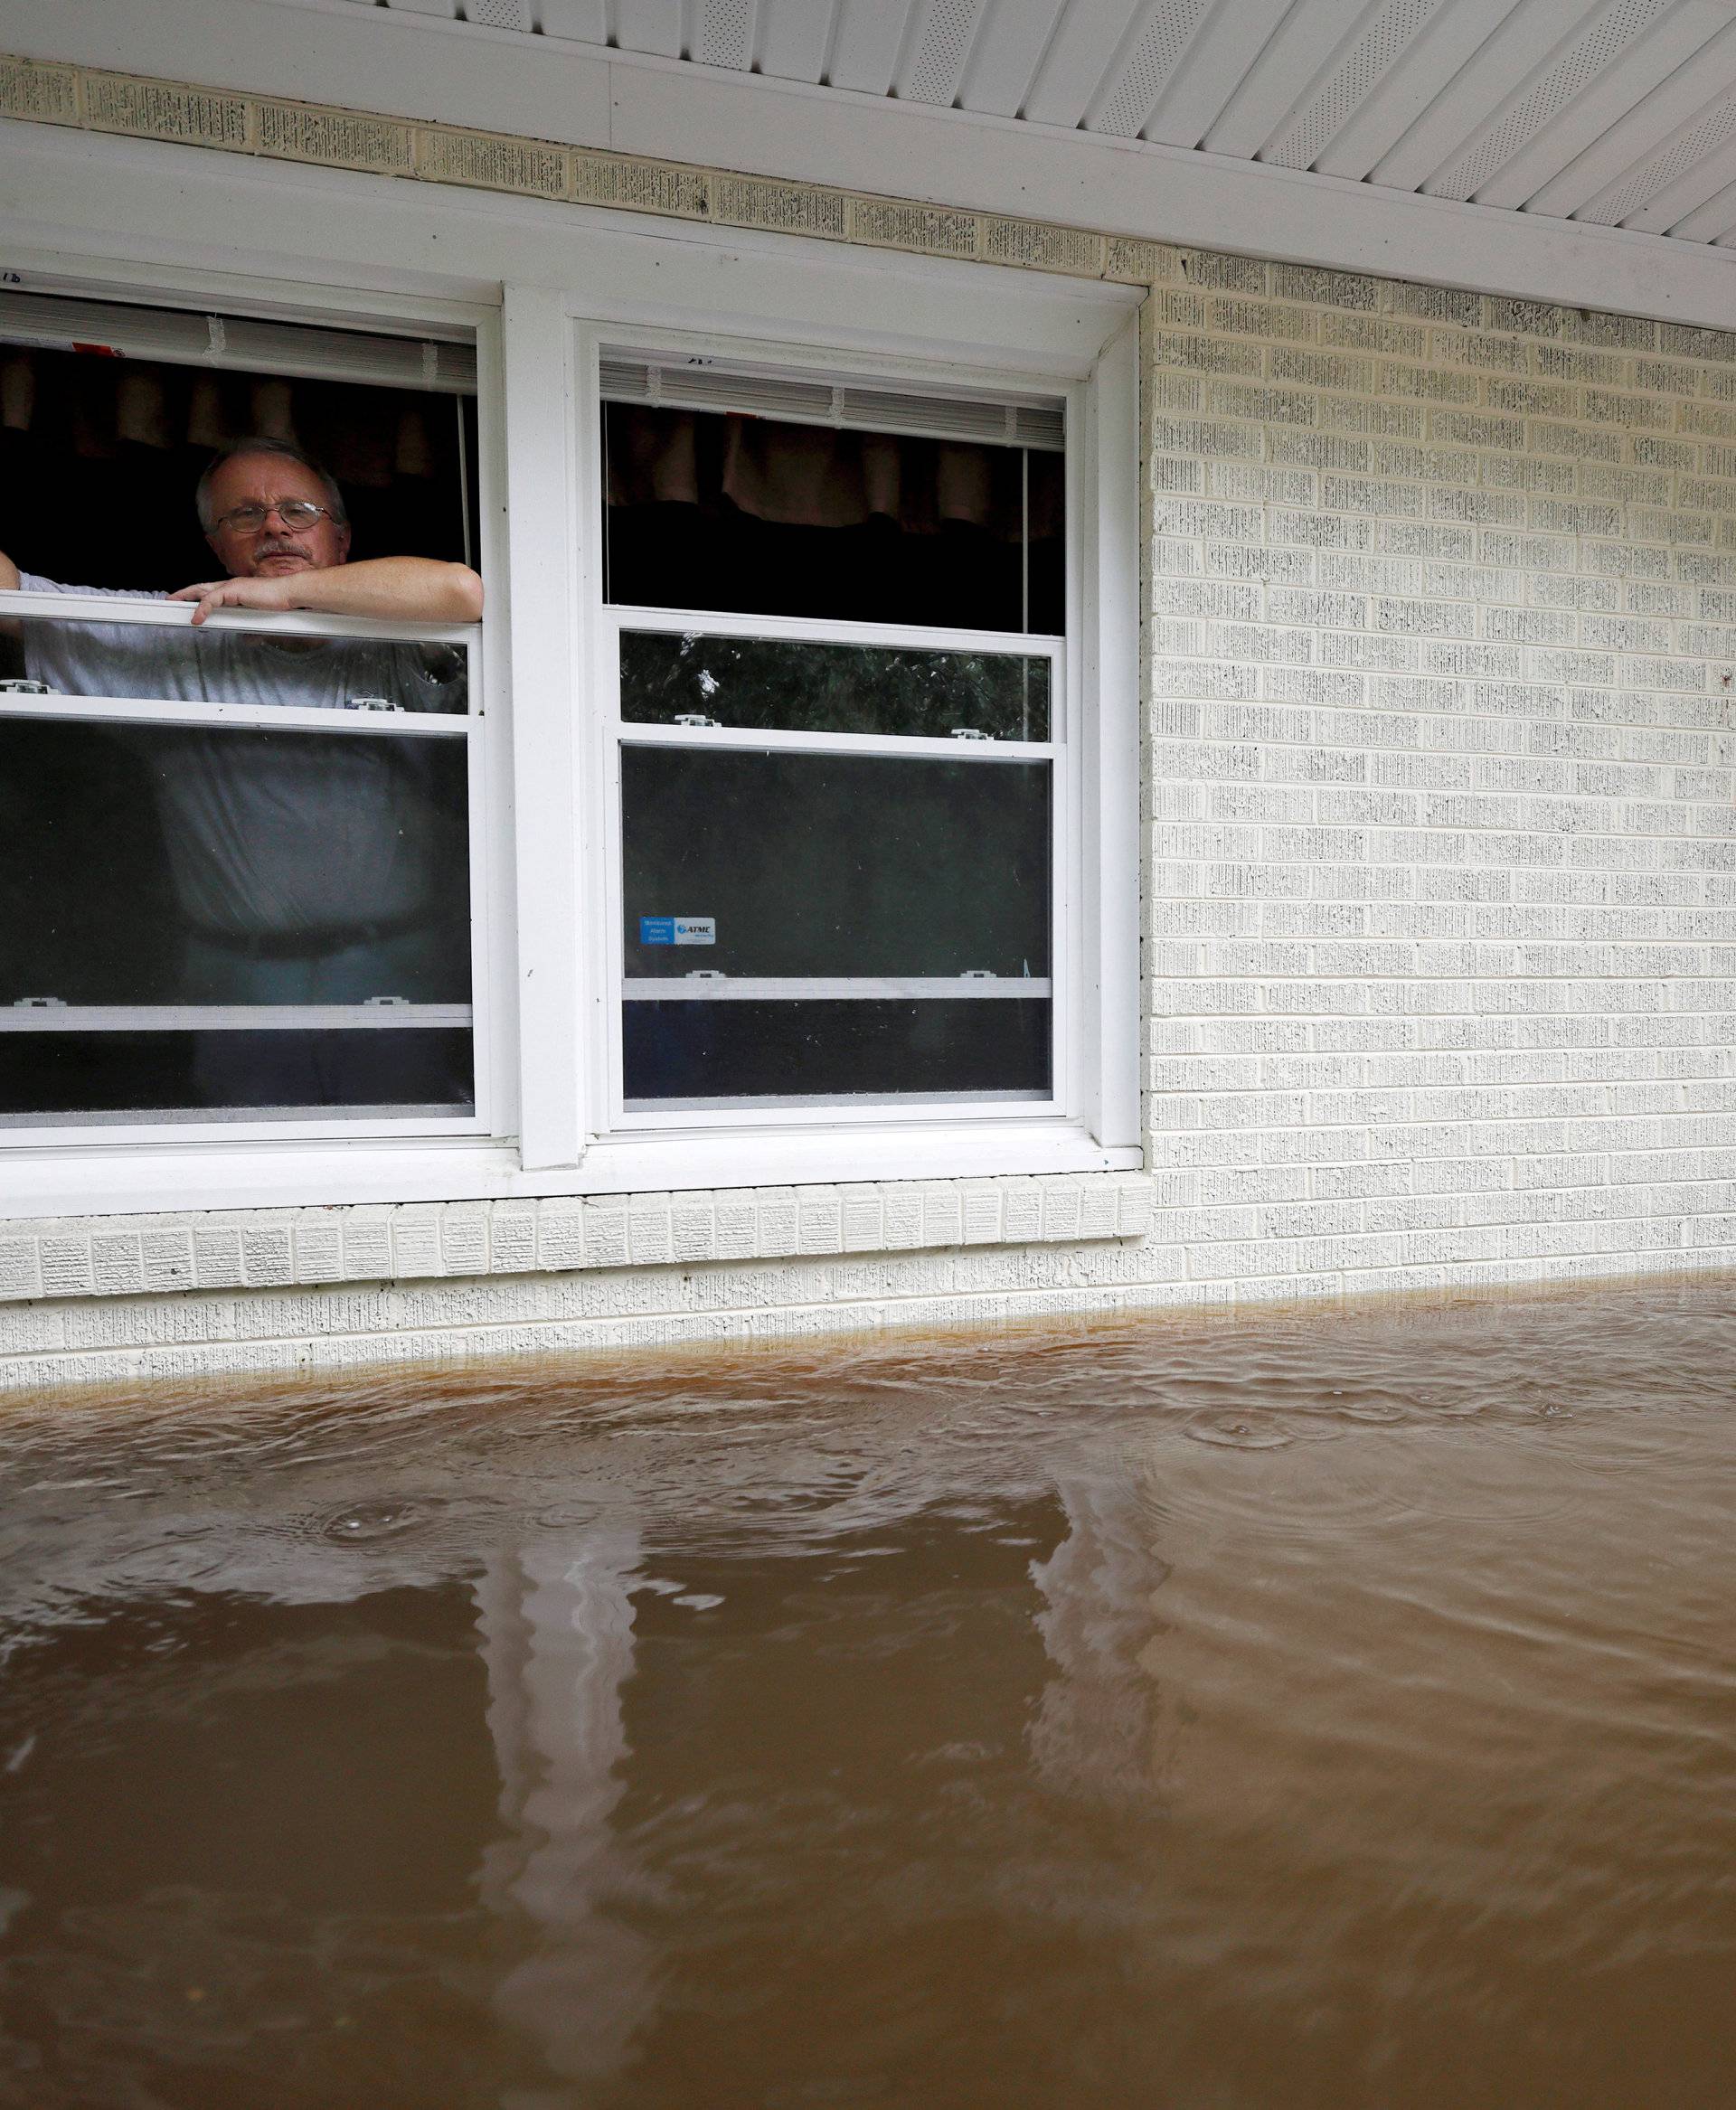 Gavrilovic peers out the window of his flooded home while considering whether to leave with his wife and pets as waters rise in North Carolina